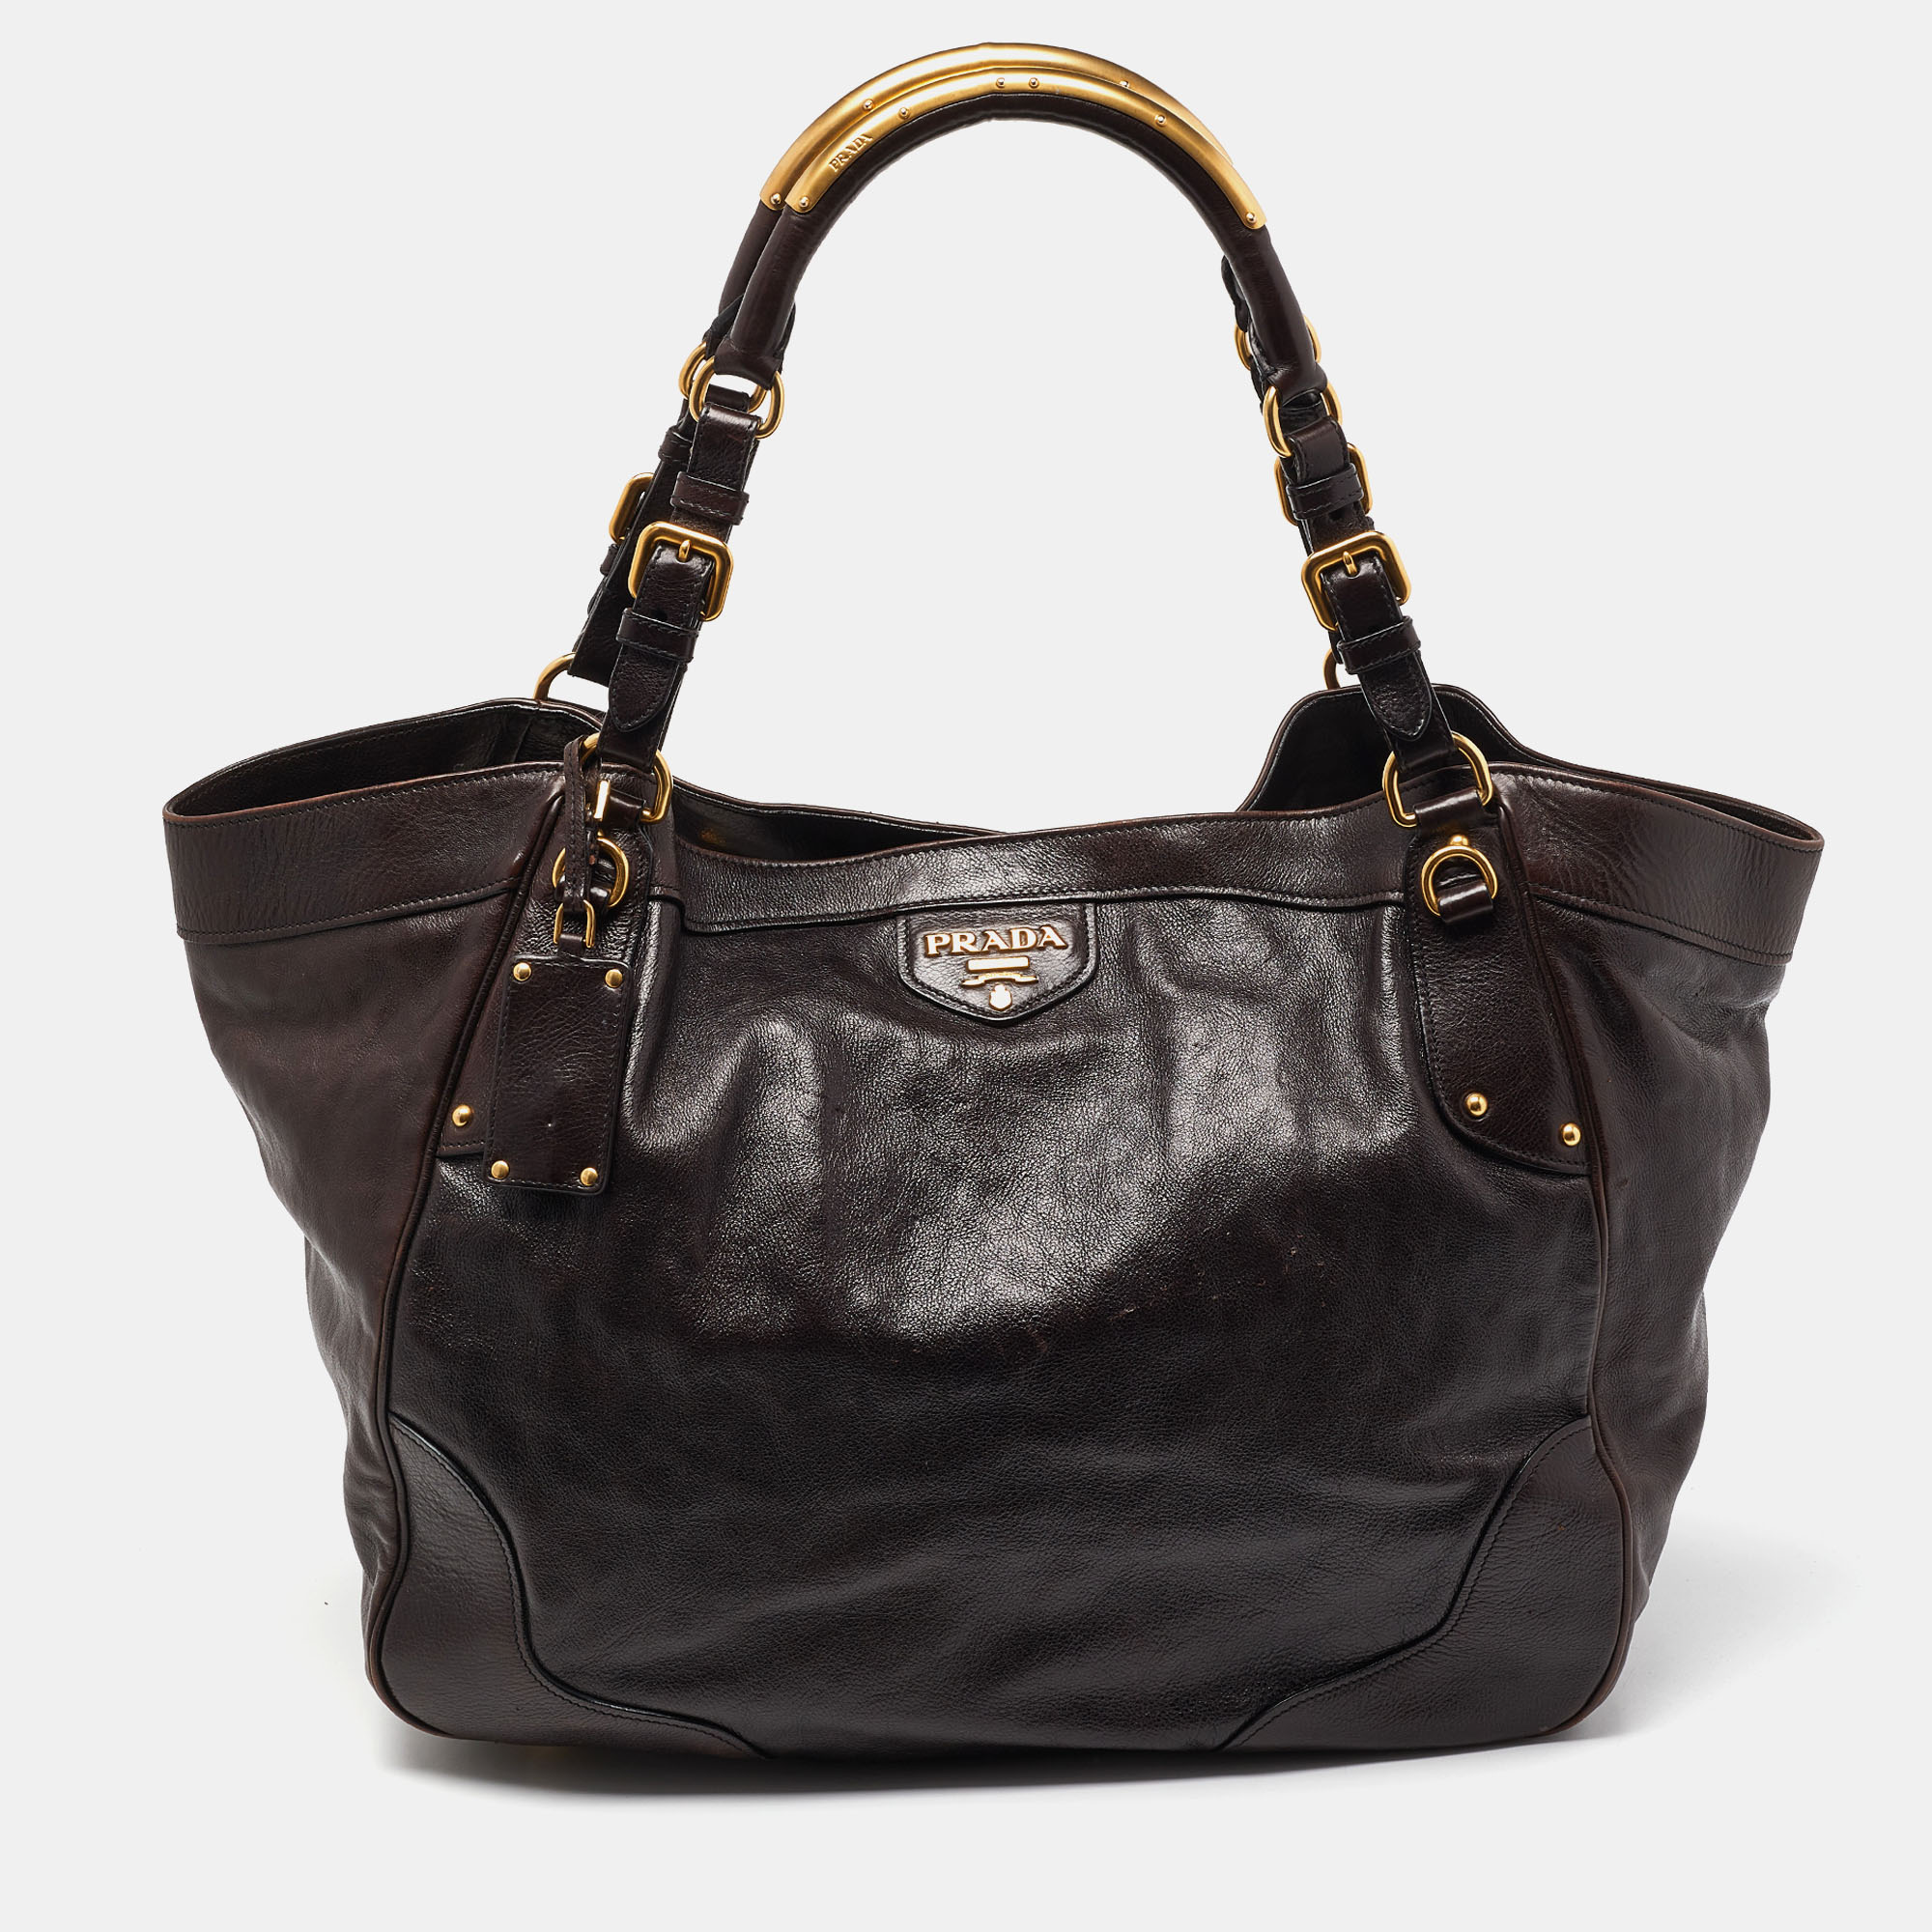 Carry this lovely Prada brown bag as a stylish accompaniment to your ensemble. Made from high quality materials it has a luxe look and durable quality.